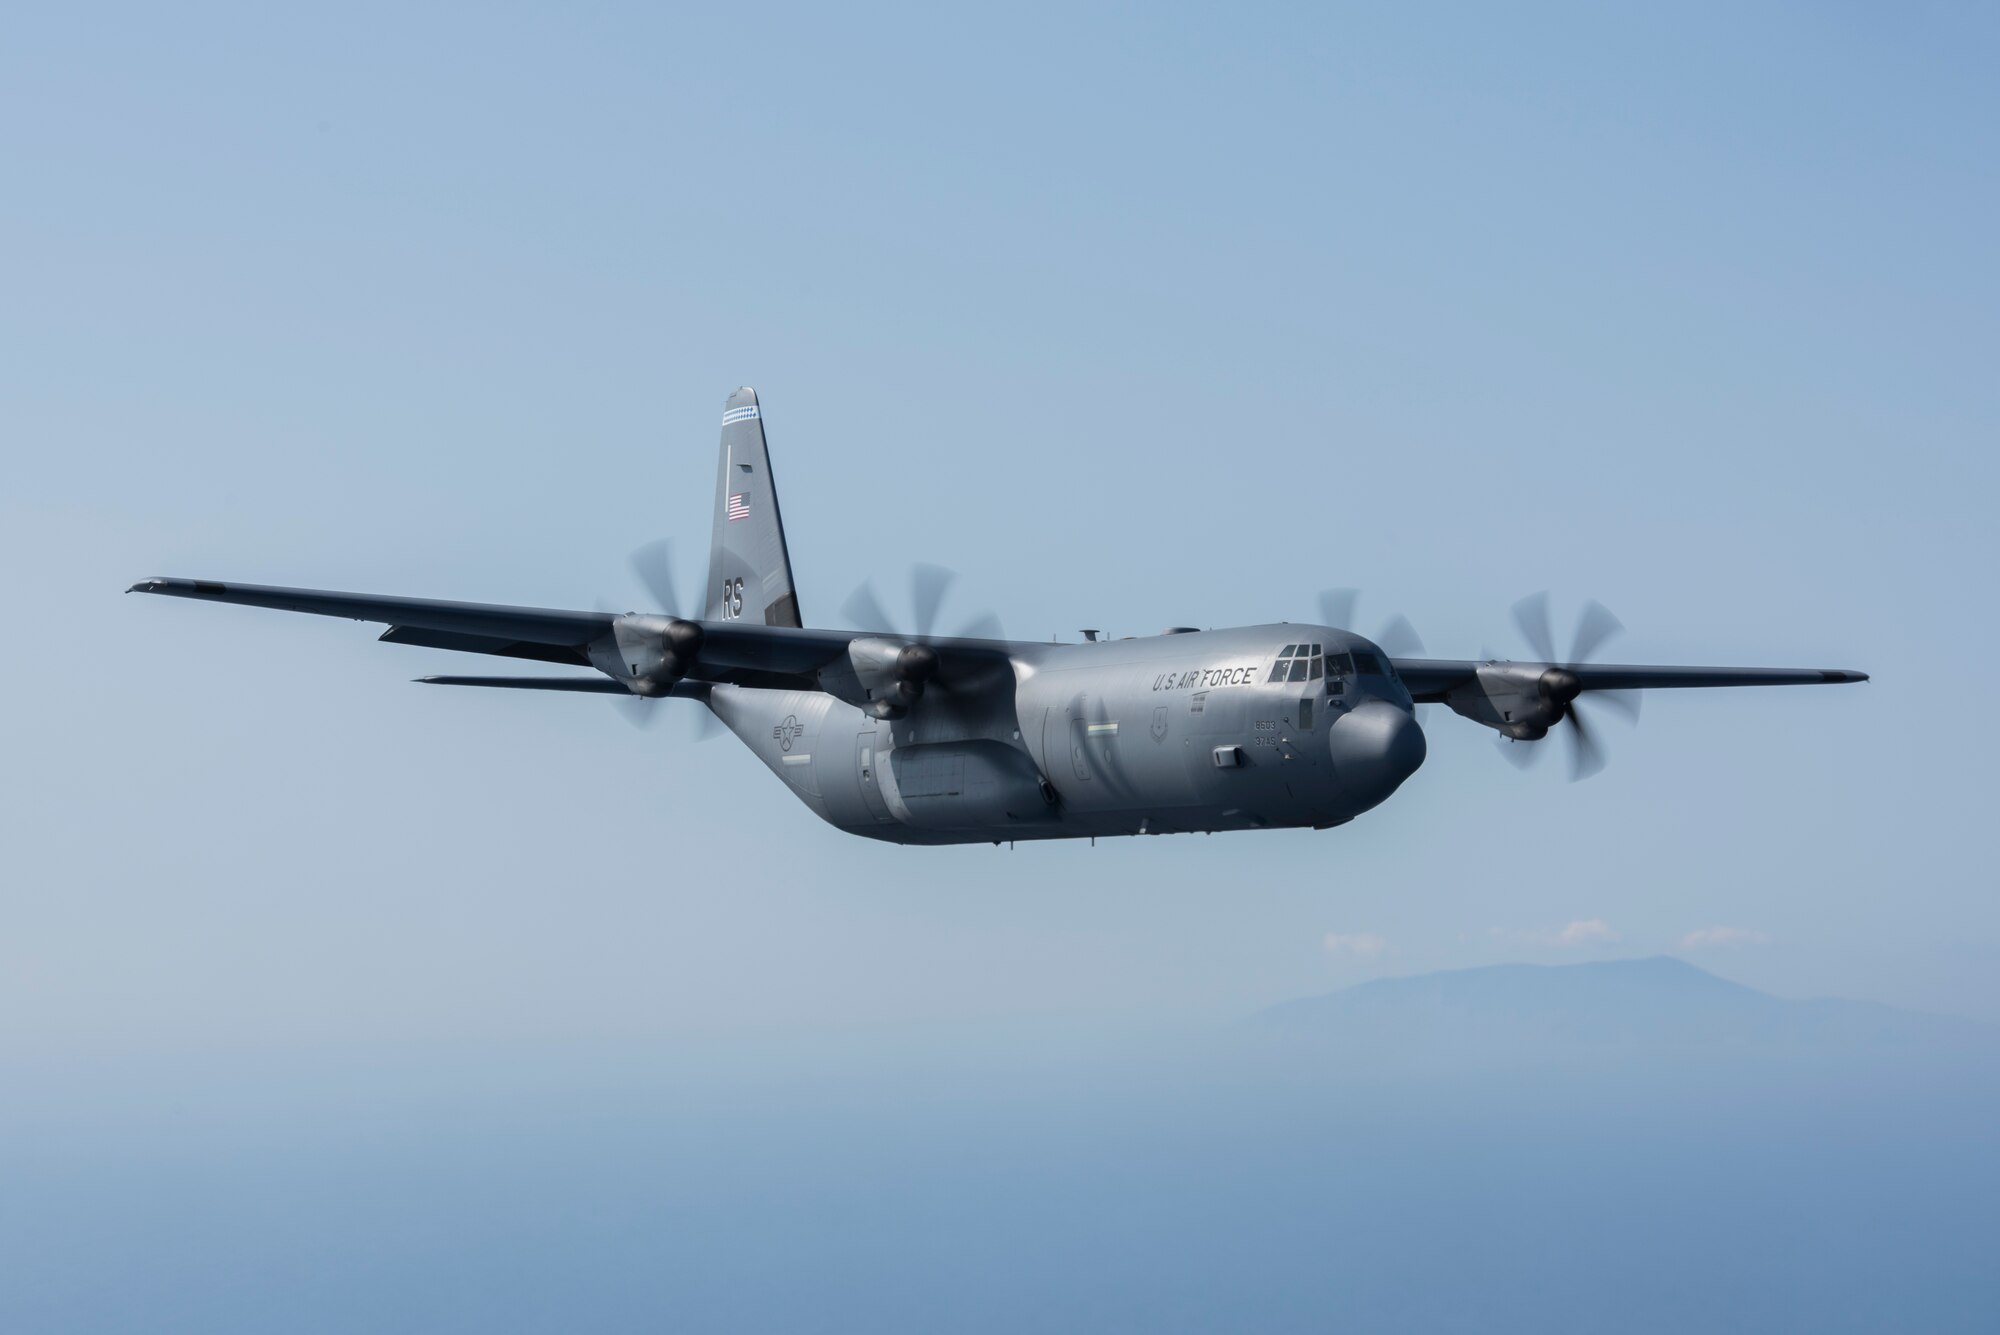 A U.S. Air Force C-130J Super Hercules flies in formation behind a Hellenic air force C-130H Hercules during an exercise Stolen Cerberus V interfly mission near Elefsis Air Base, Greece, May 10, 2018. The two aircraft flew through multiple drop zones and different terrains during the mission. (U.S. Air Force photo by Senior Airman Devin M. Rumbaugh)